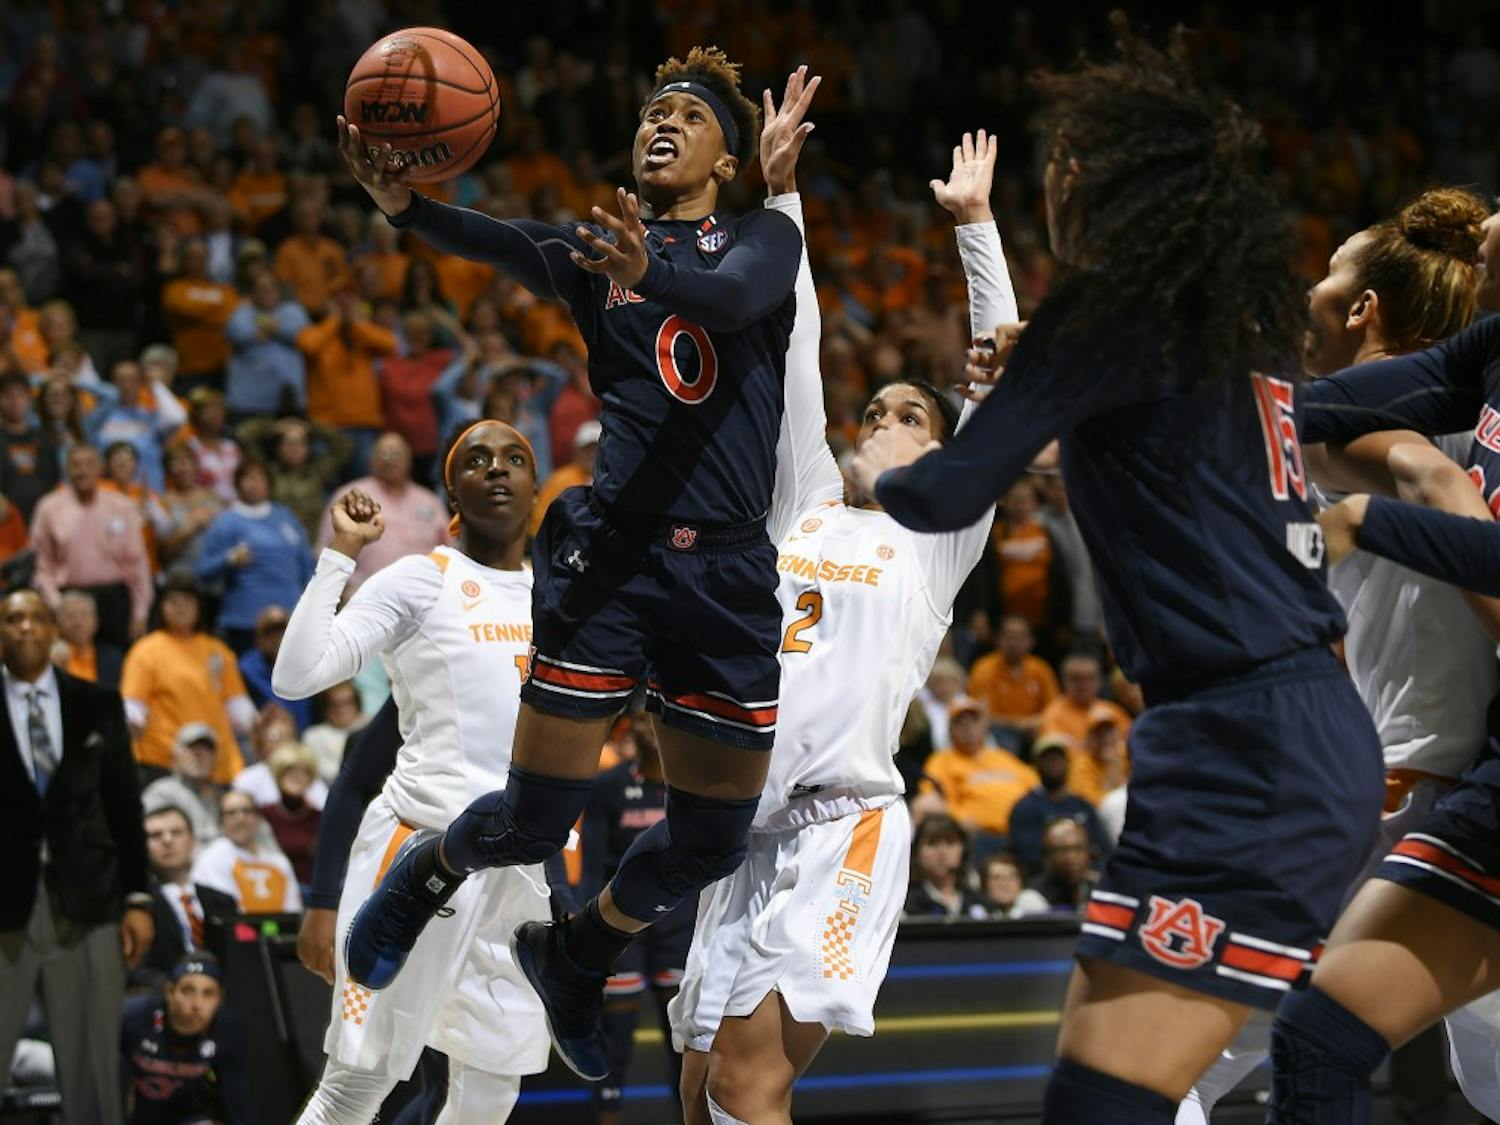 Auburn's Daisa Alexander lays in a basket to tie Tennessee with 11 seconds left to play. Tennessee's Rennis Davis hit a 3-pointer with .5 seconds left to win.
Auburn vs Tennessee
SEC Women's Basketball Tournament on Thursday, March 1, 2018 in Nashville, TN. 
Todd Van Emst/SEC
